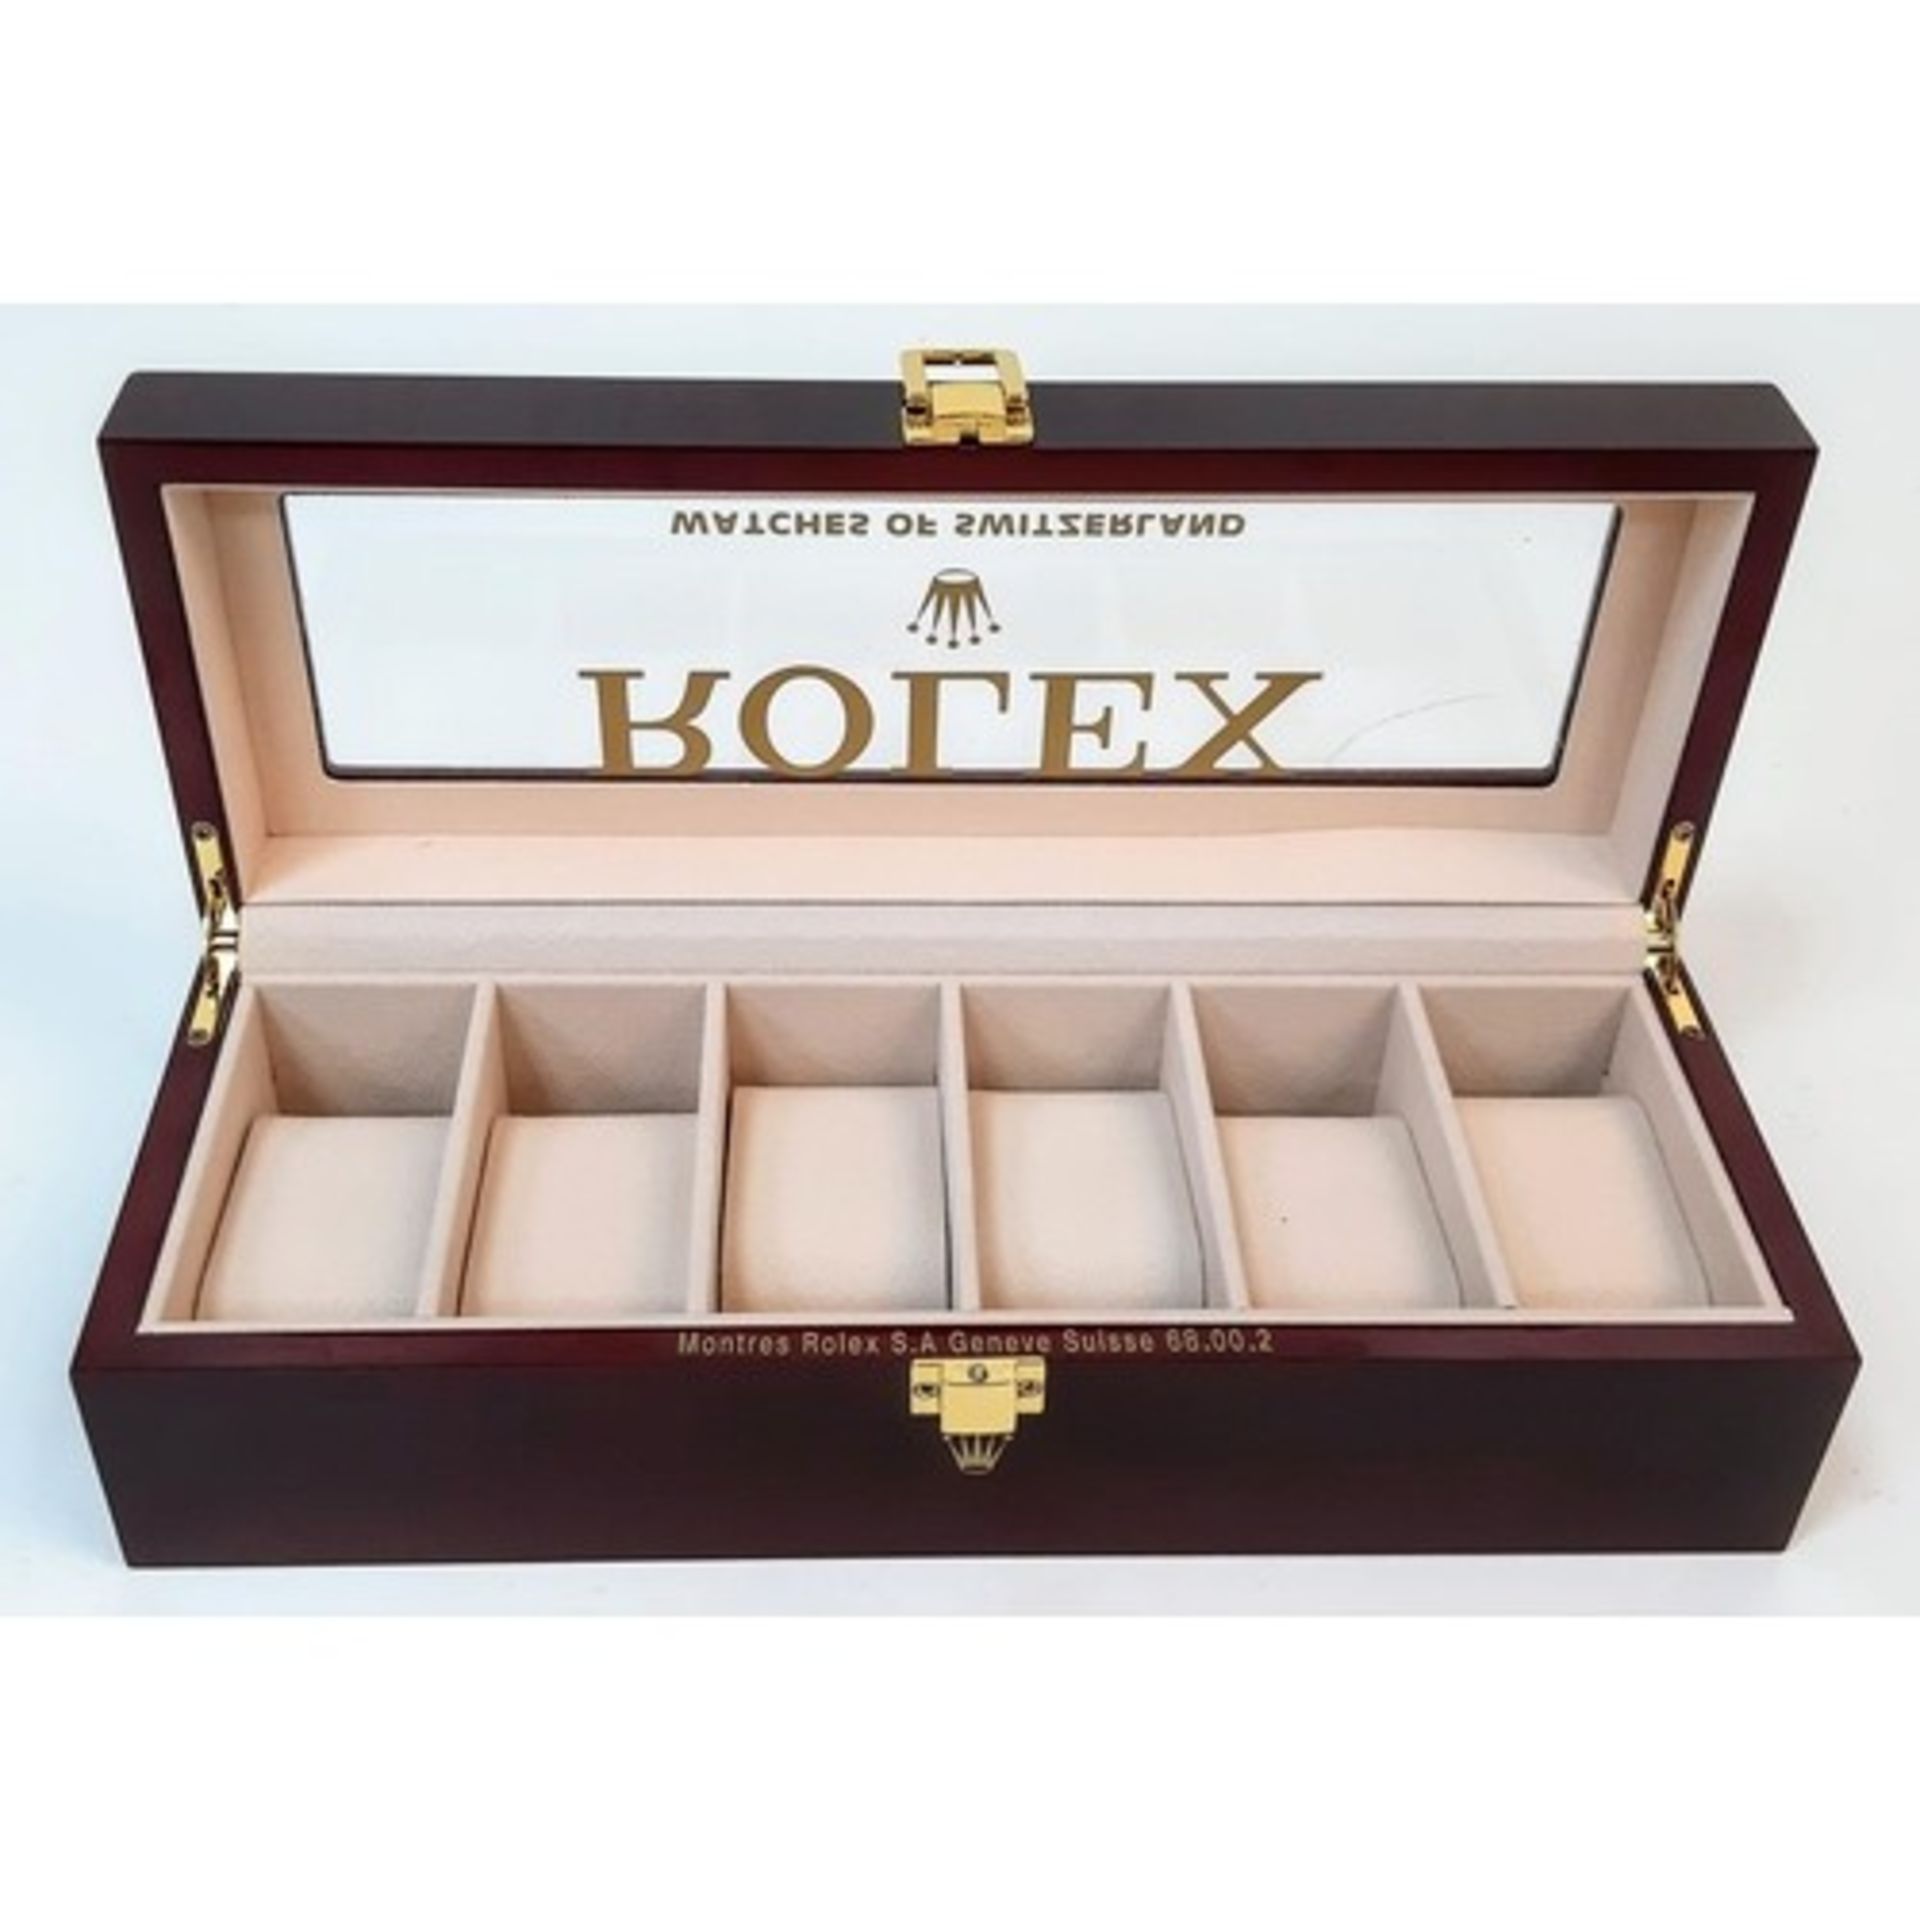 A Six Space Watch Case - Perfect for Rolex Watches. Polished veneer exterior. Plush interior. In